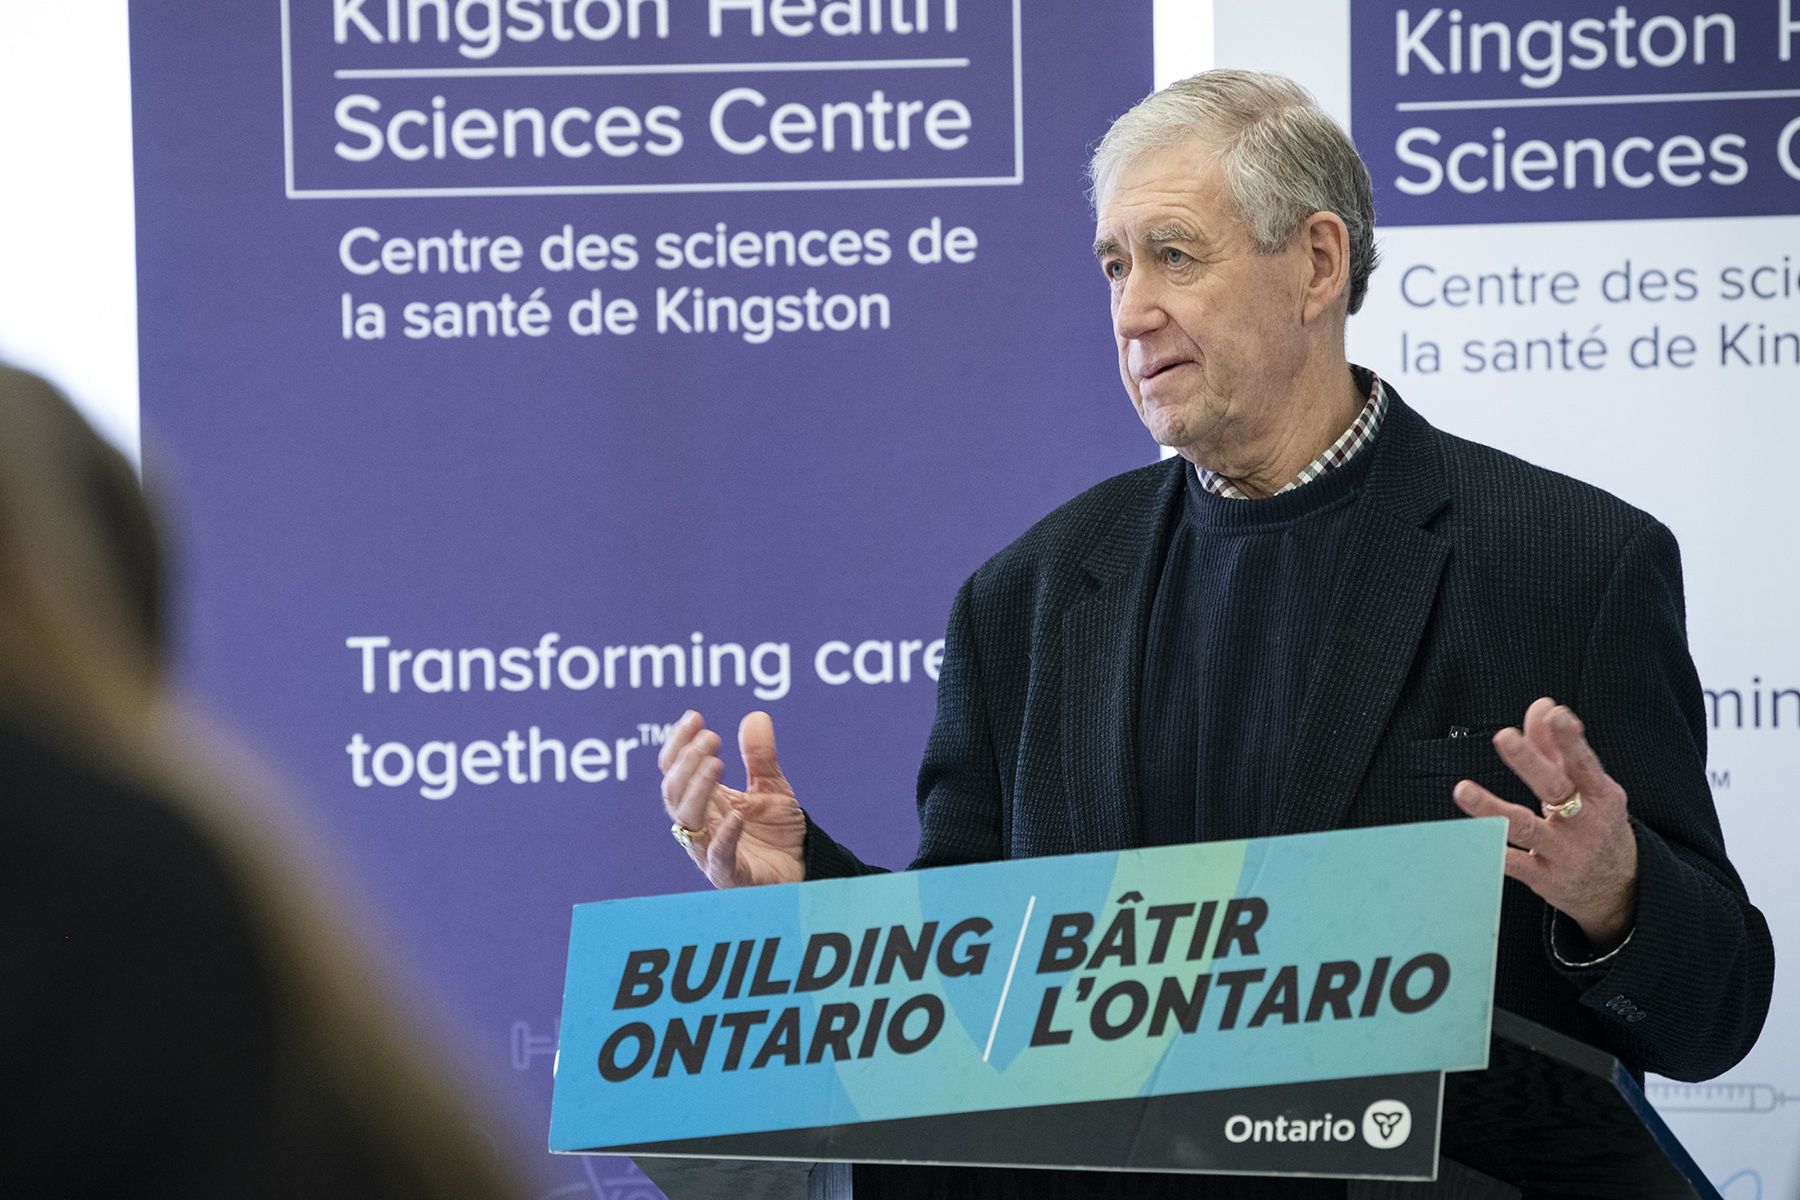 (File Photo) MPP Daryl Kramp (here speaking at a KHSC event in March) recently announced an additional $45 million in funding for KHSC.